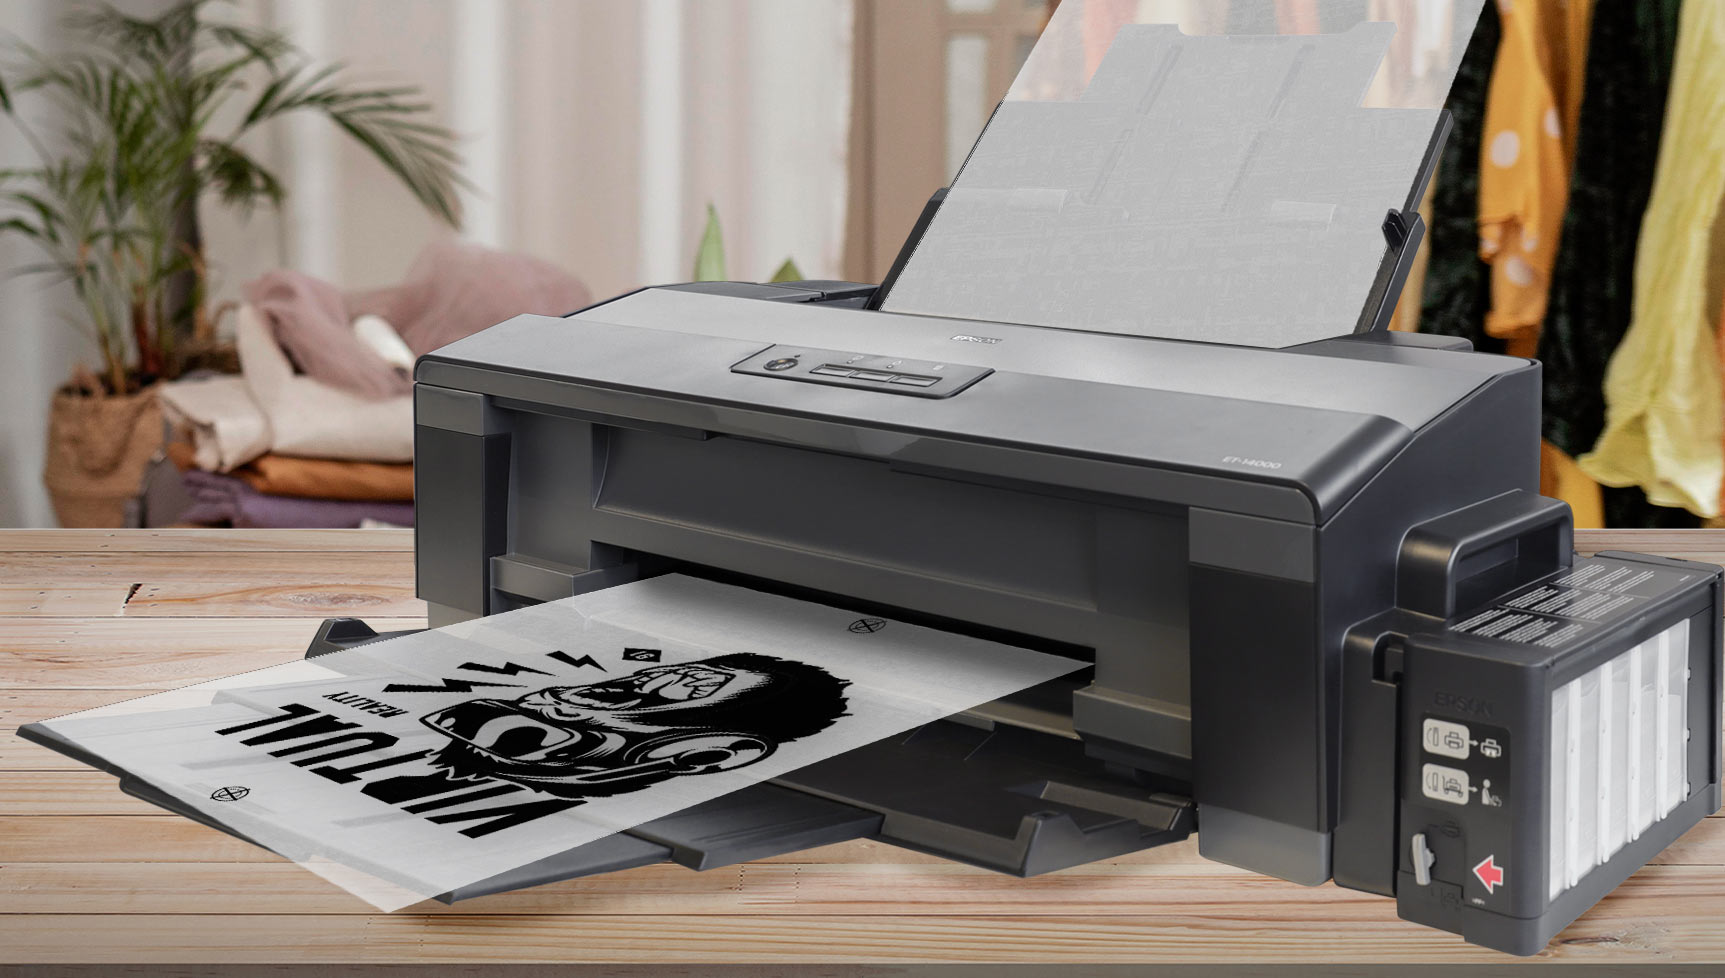 Printing photocopies for little money and from your own workshop